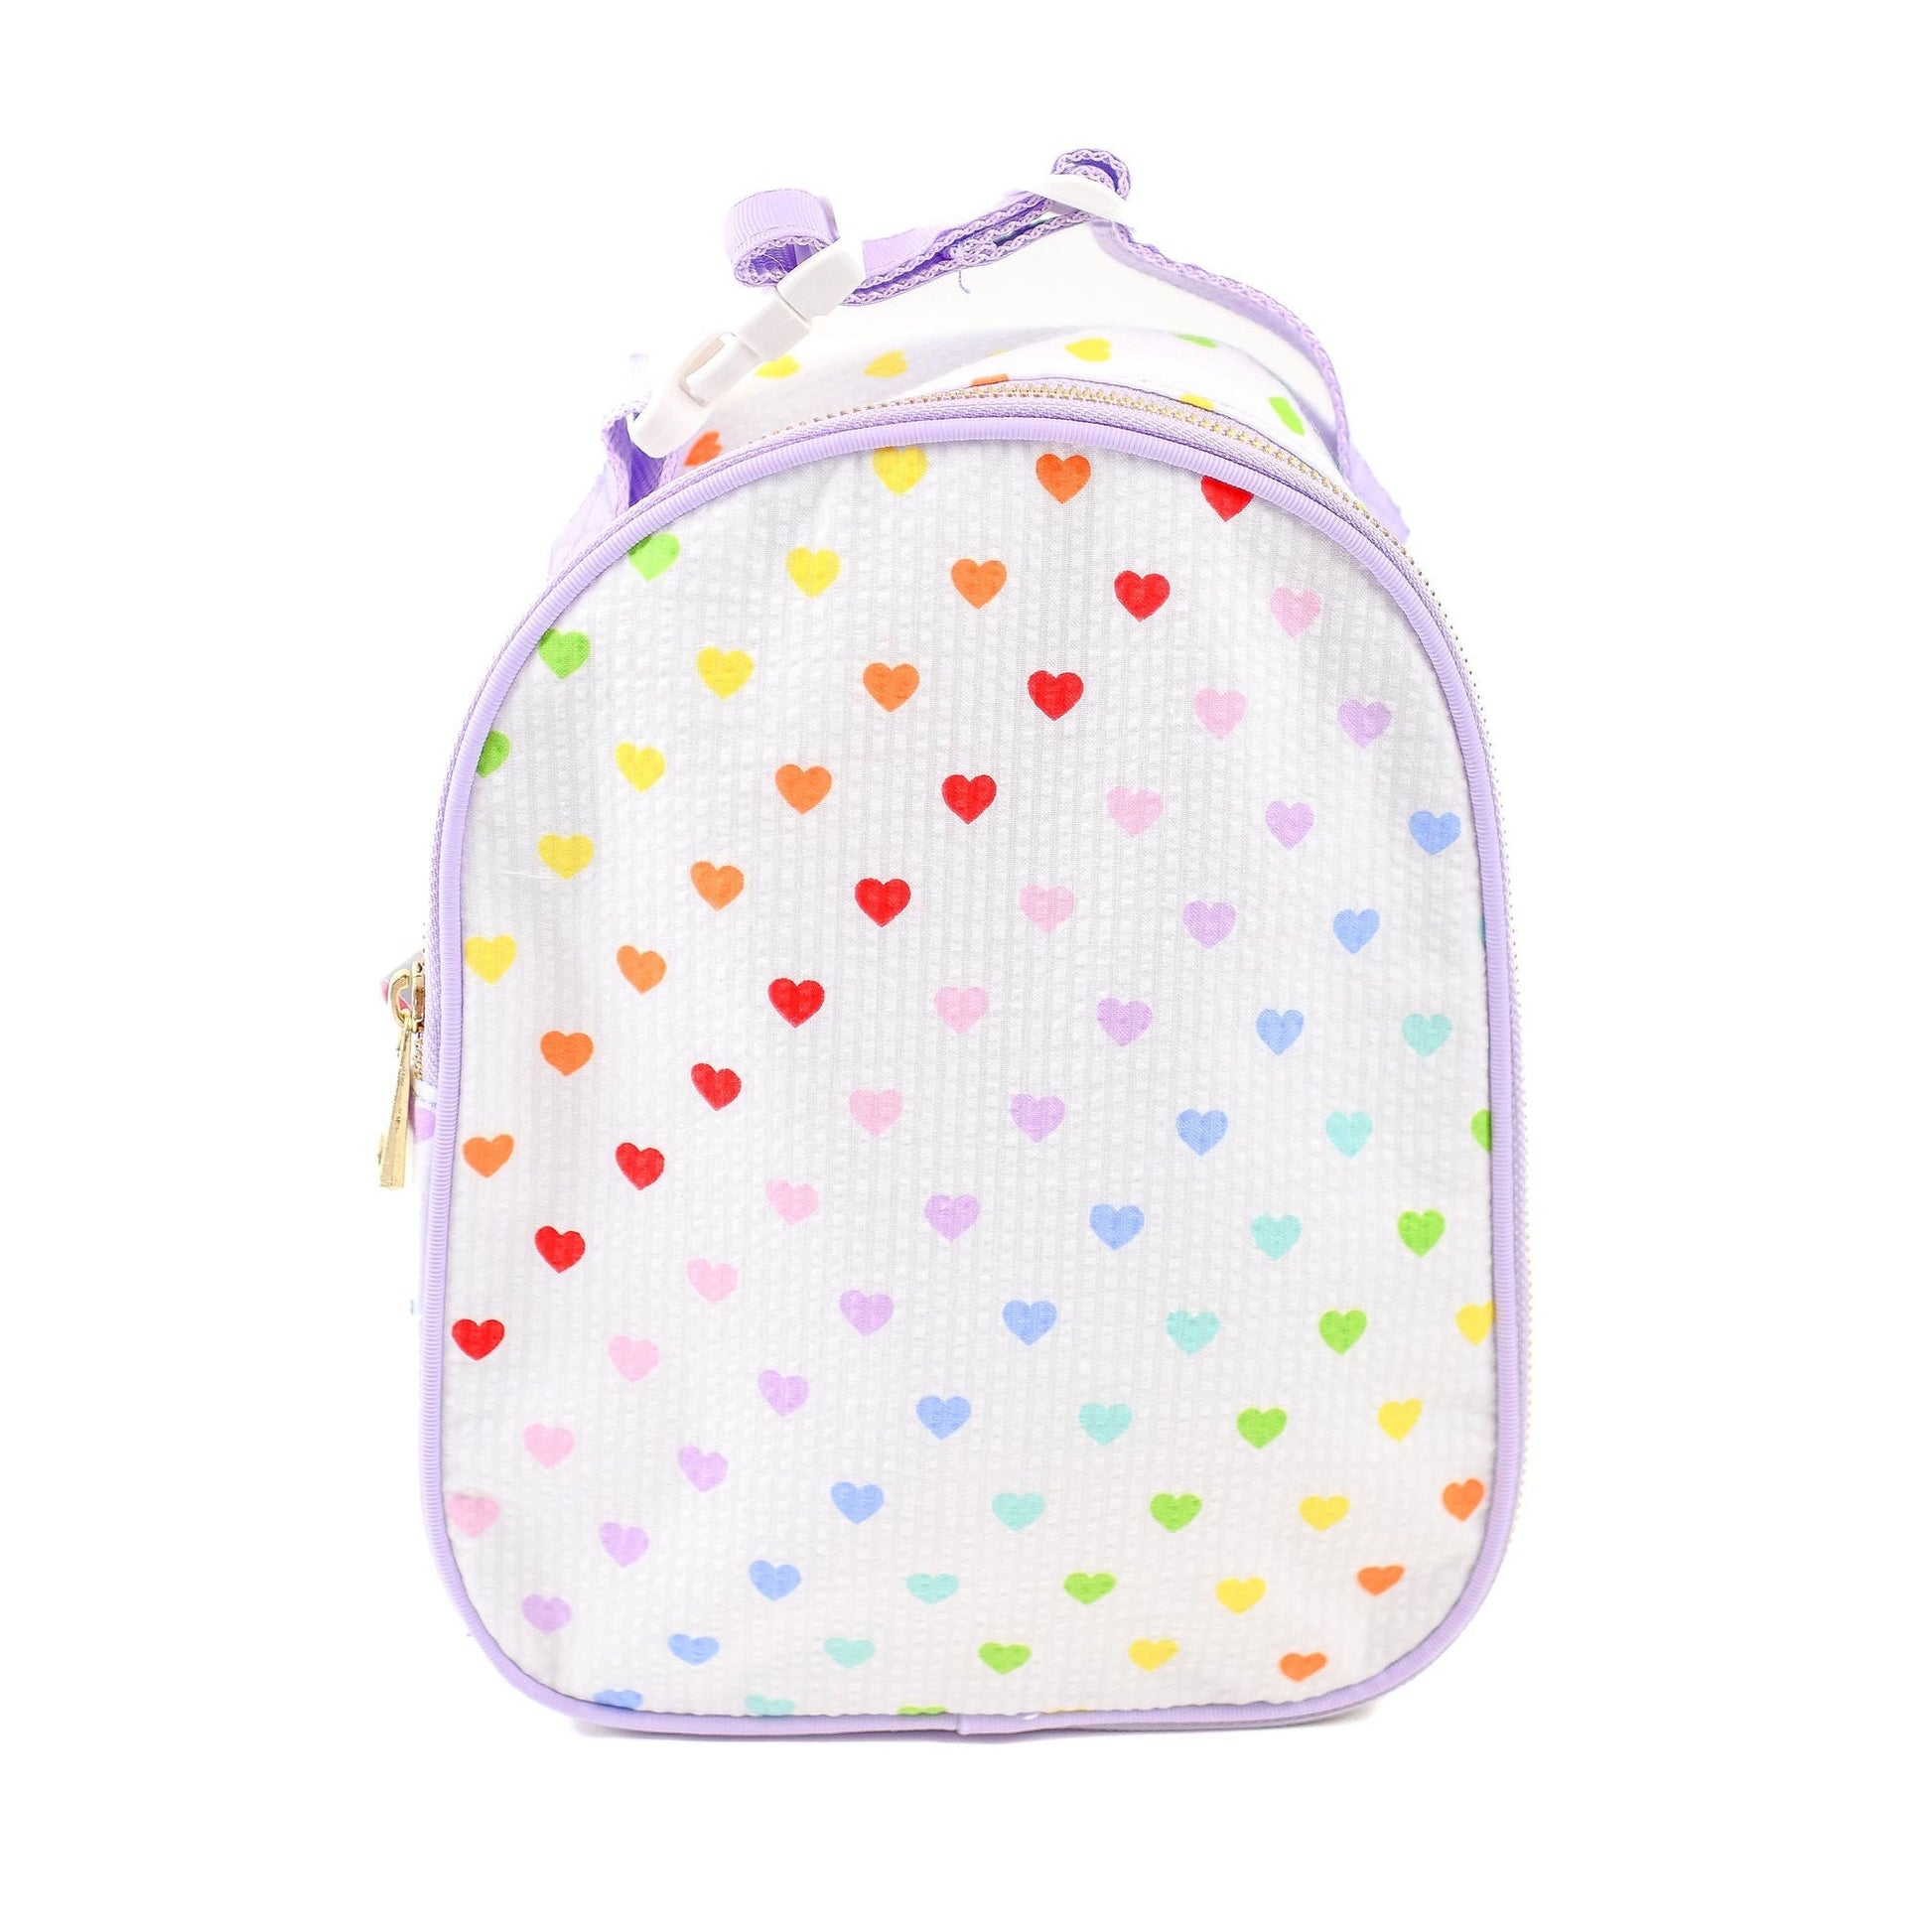 Tiny Hearts Gumdrop Lunchbox by Mint.